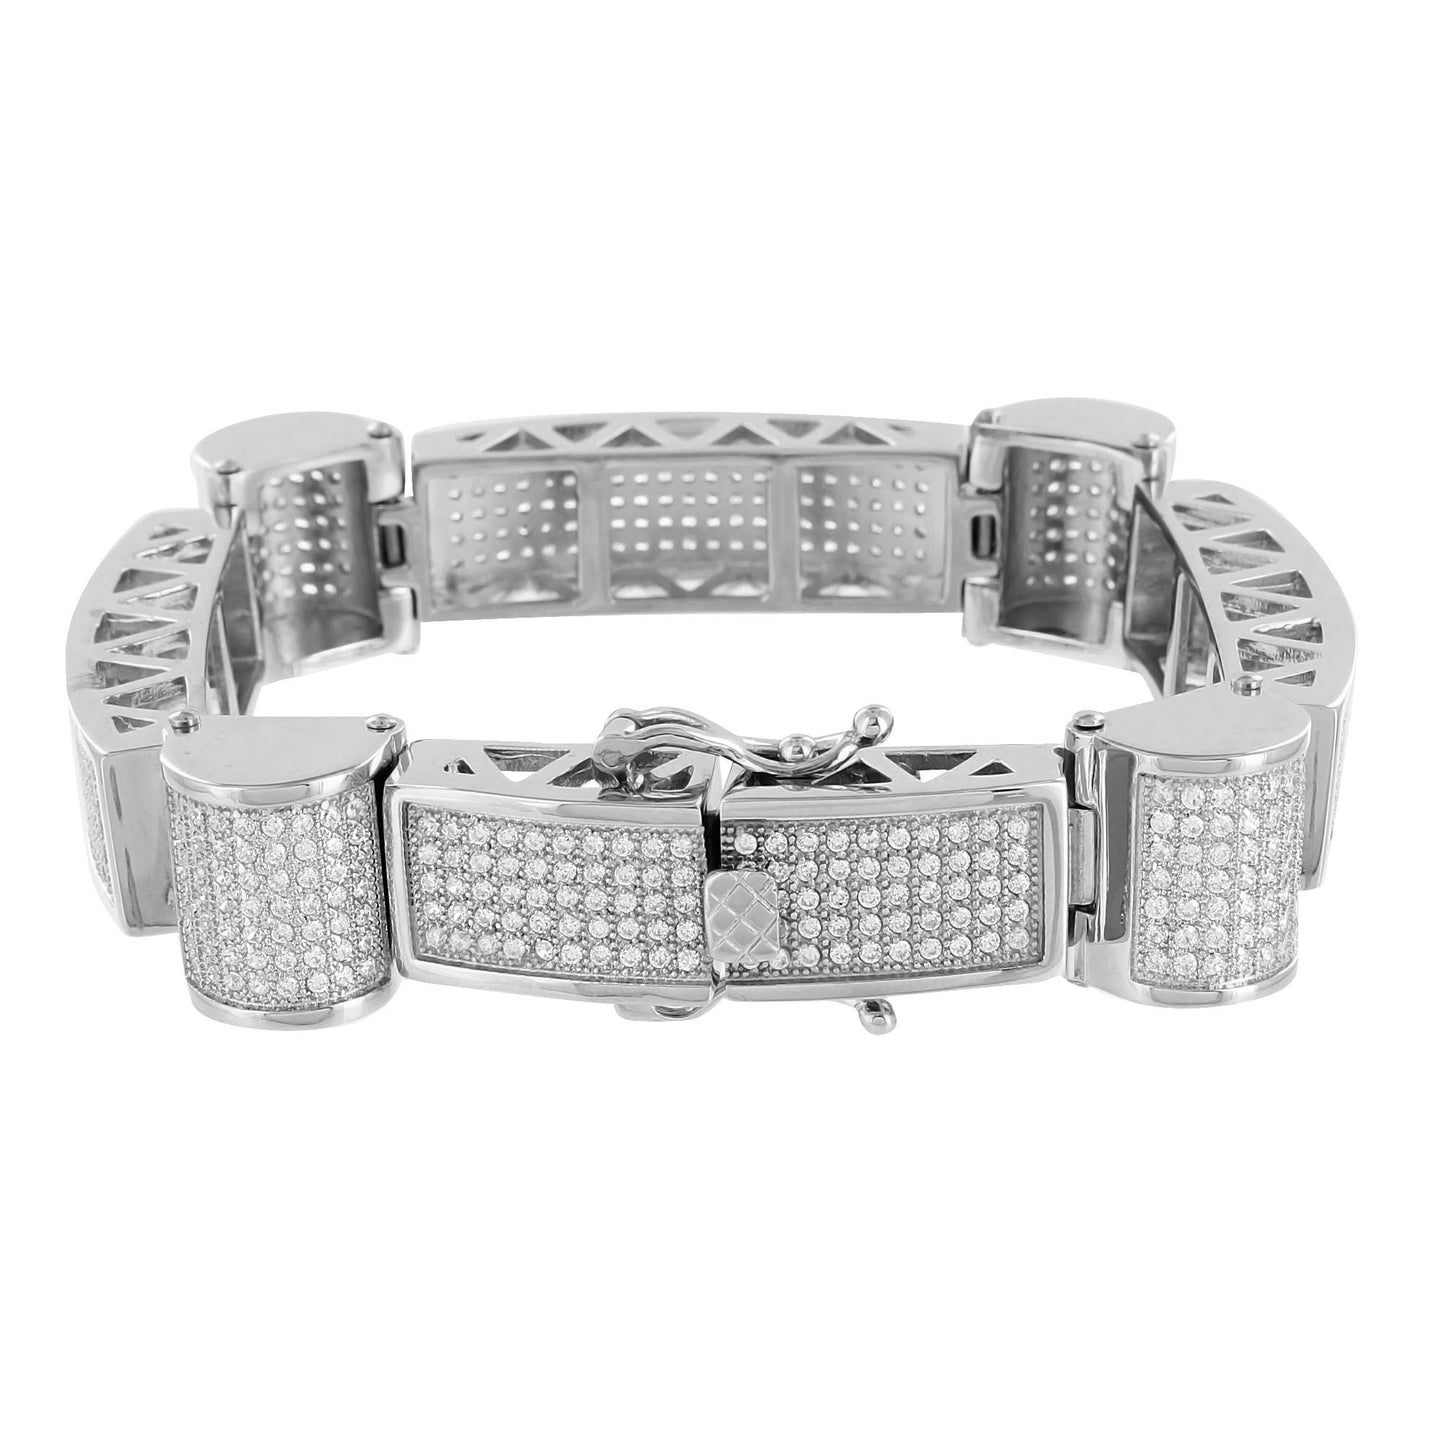 Mens White Gold Bracelet Lab Diamonds 14K Finish Solid Stainless Steel Dome Link